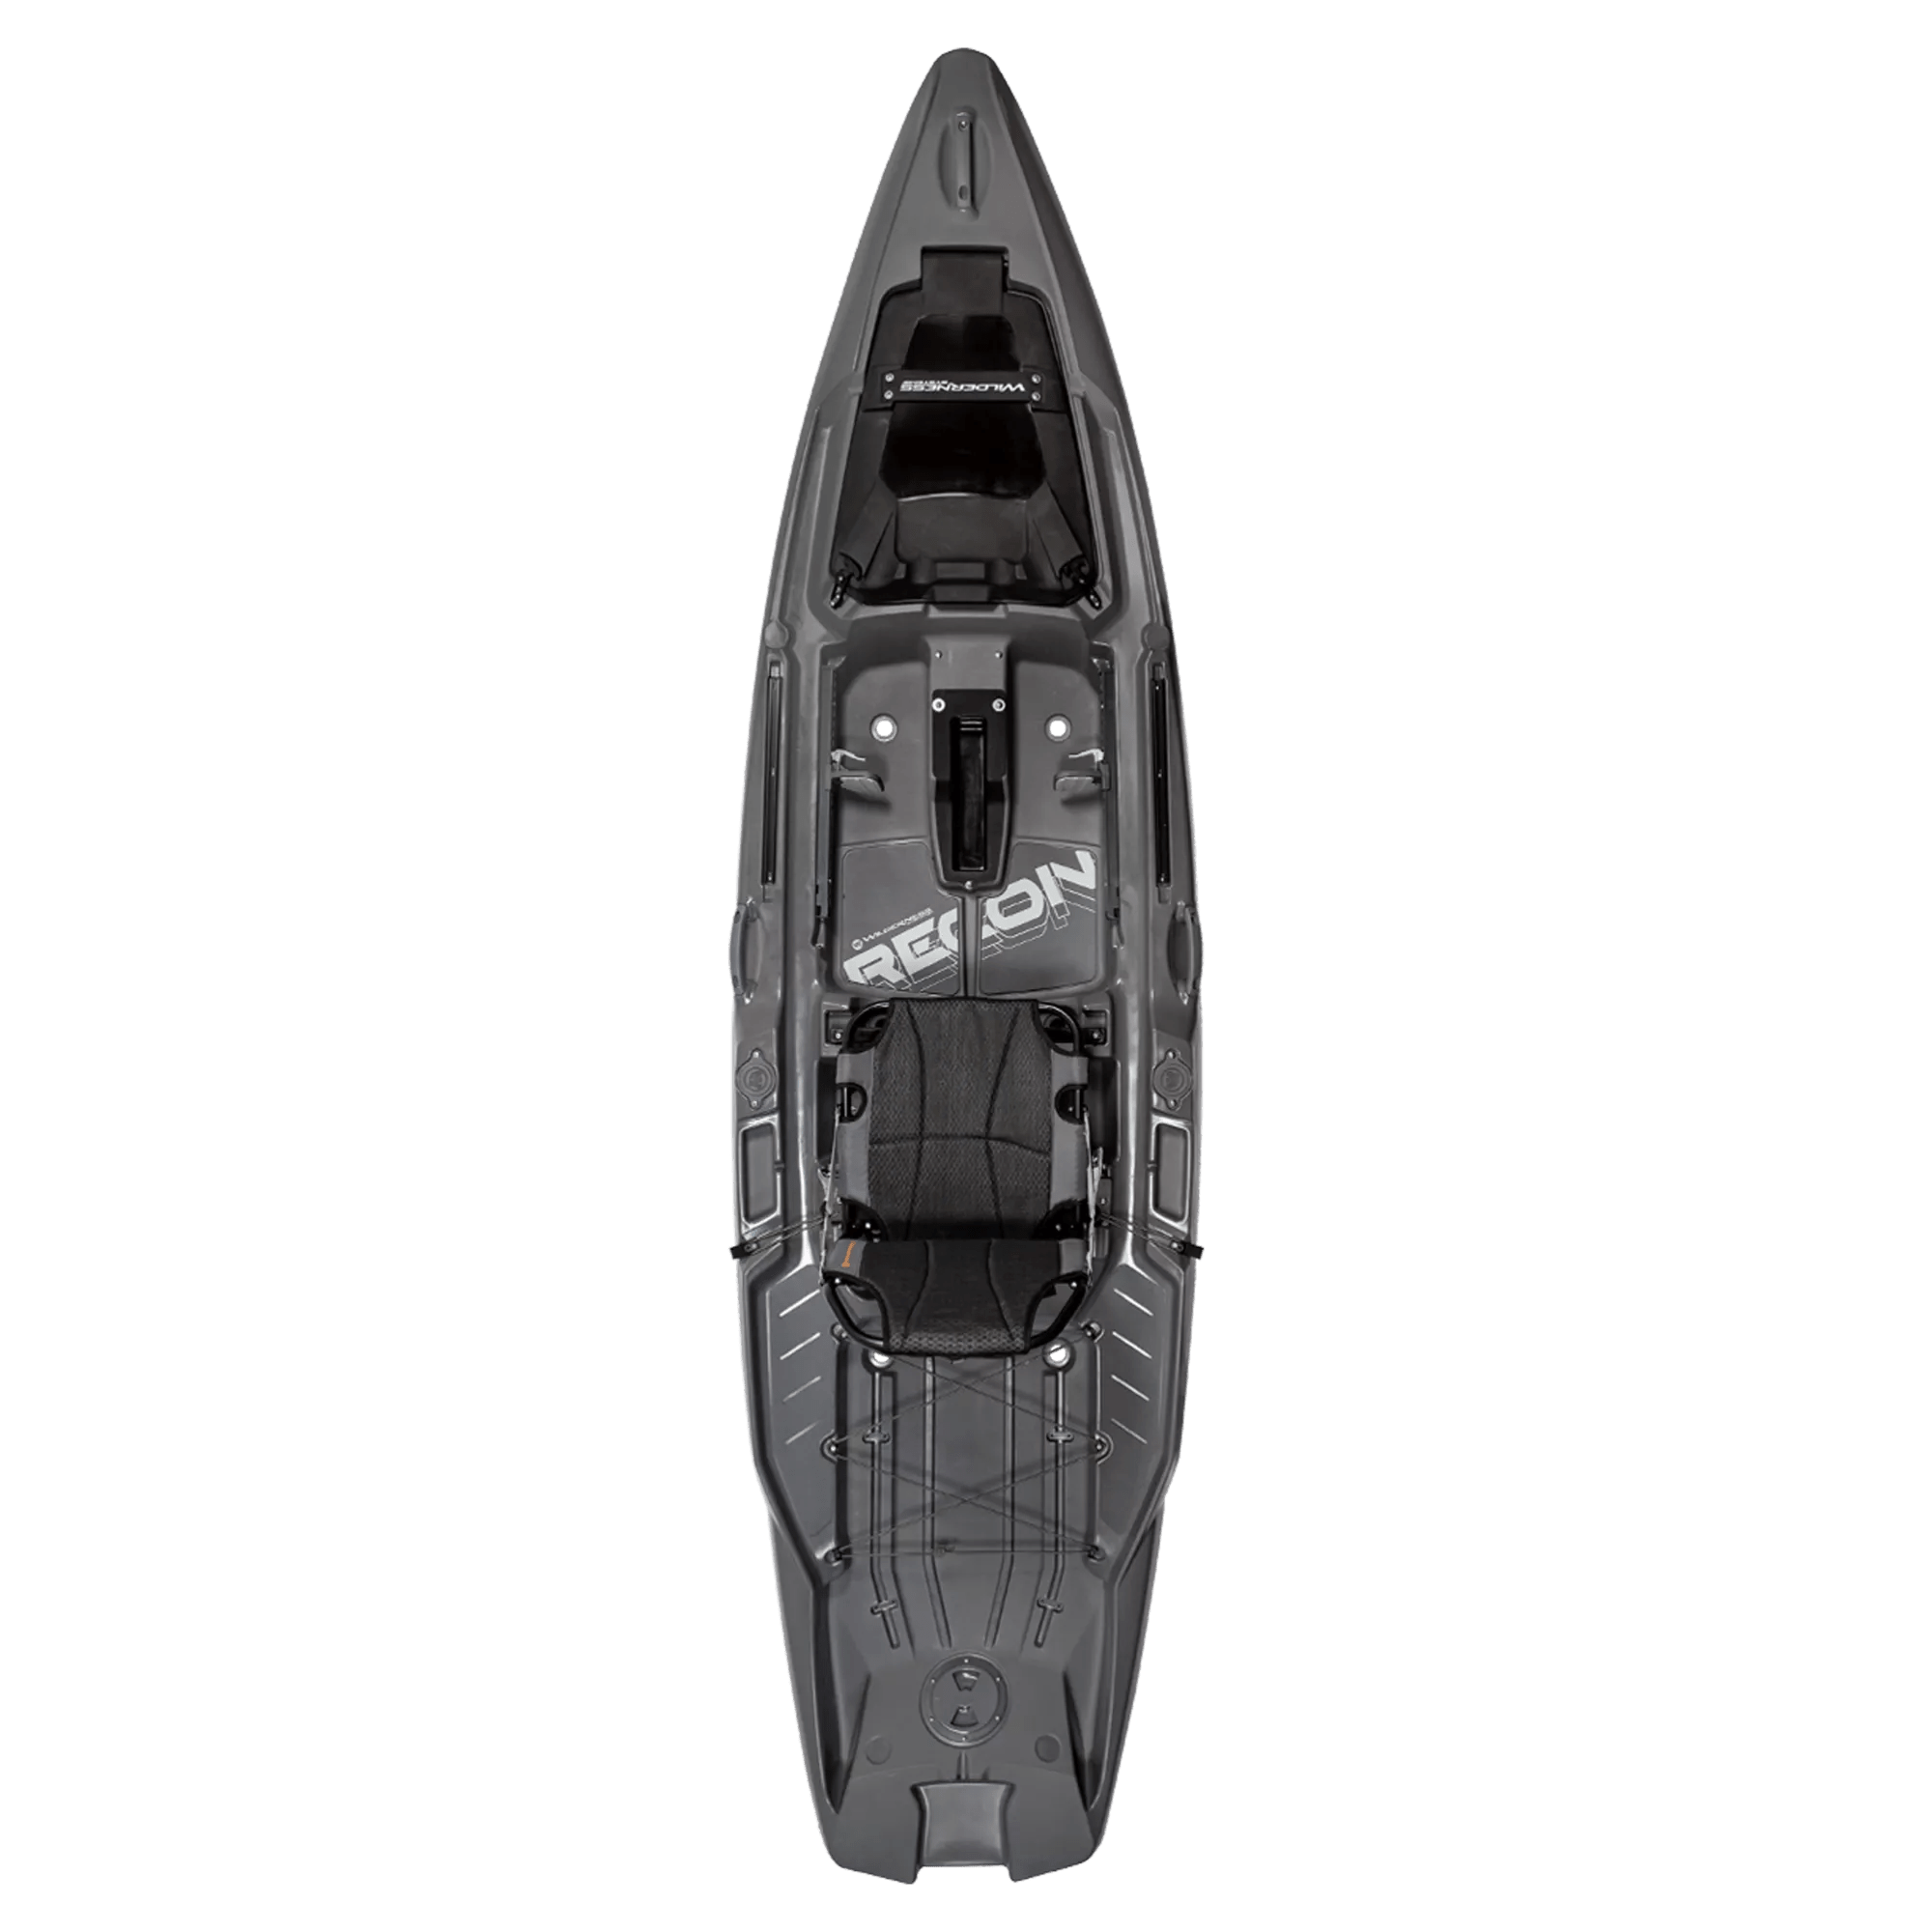 WILDERNESS SYSTEMS - Recon 120 Fishing Kayak - Discontinued color/model - Grey - 9751100153 - TOP